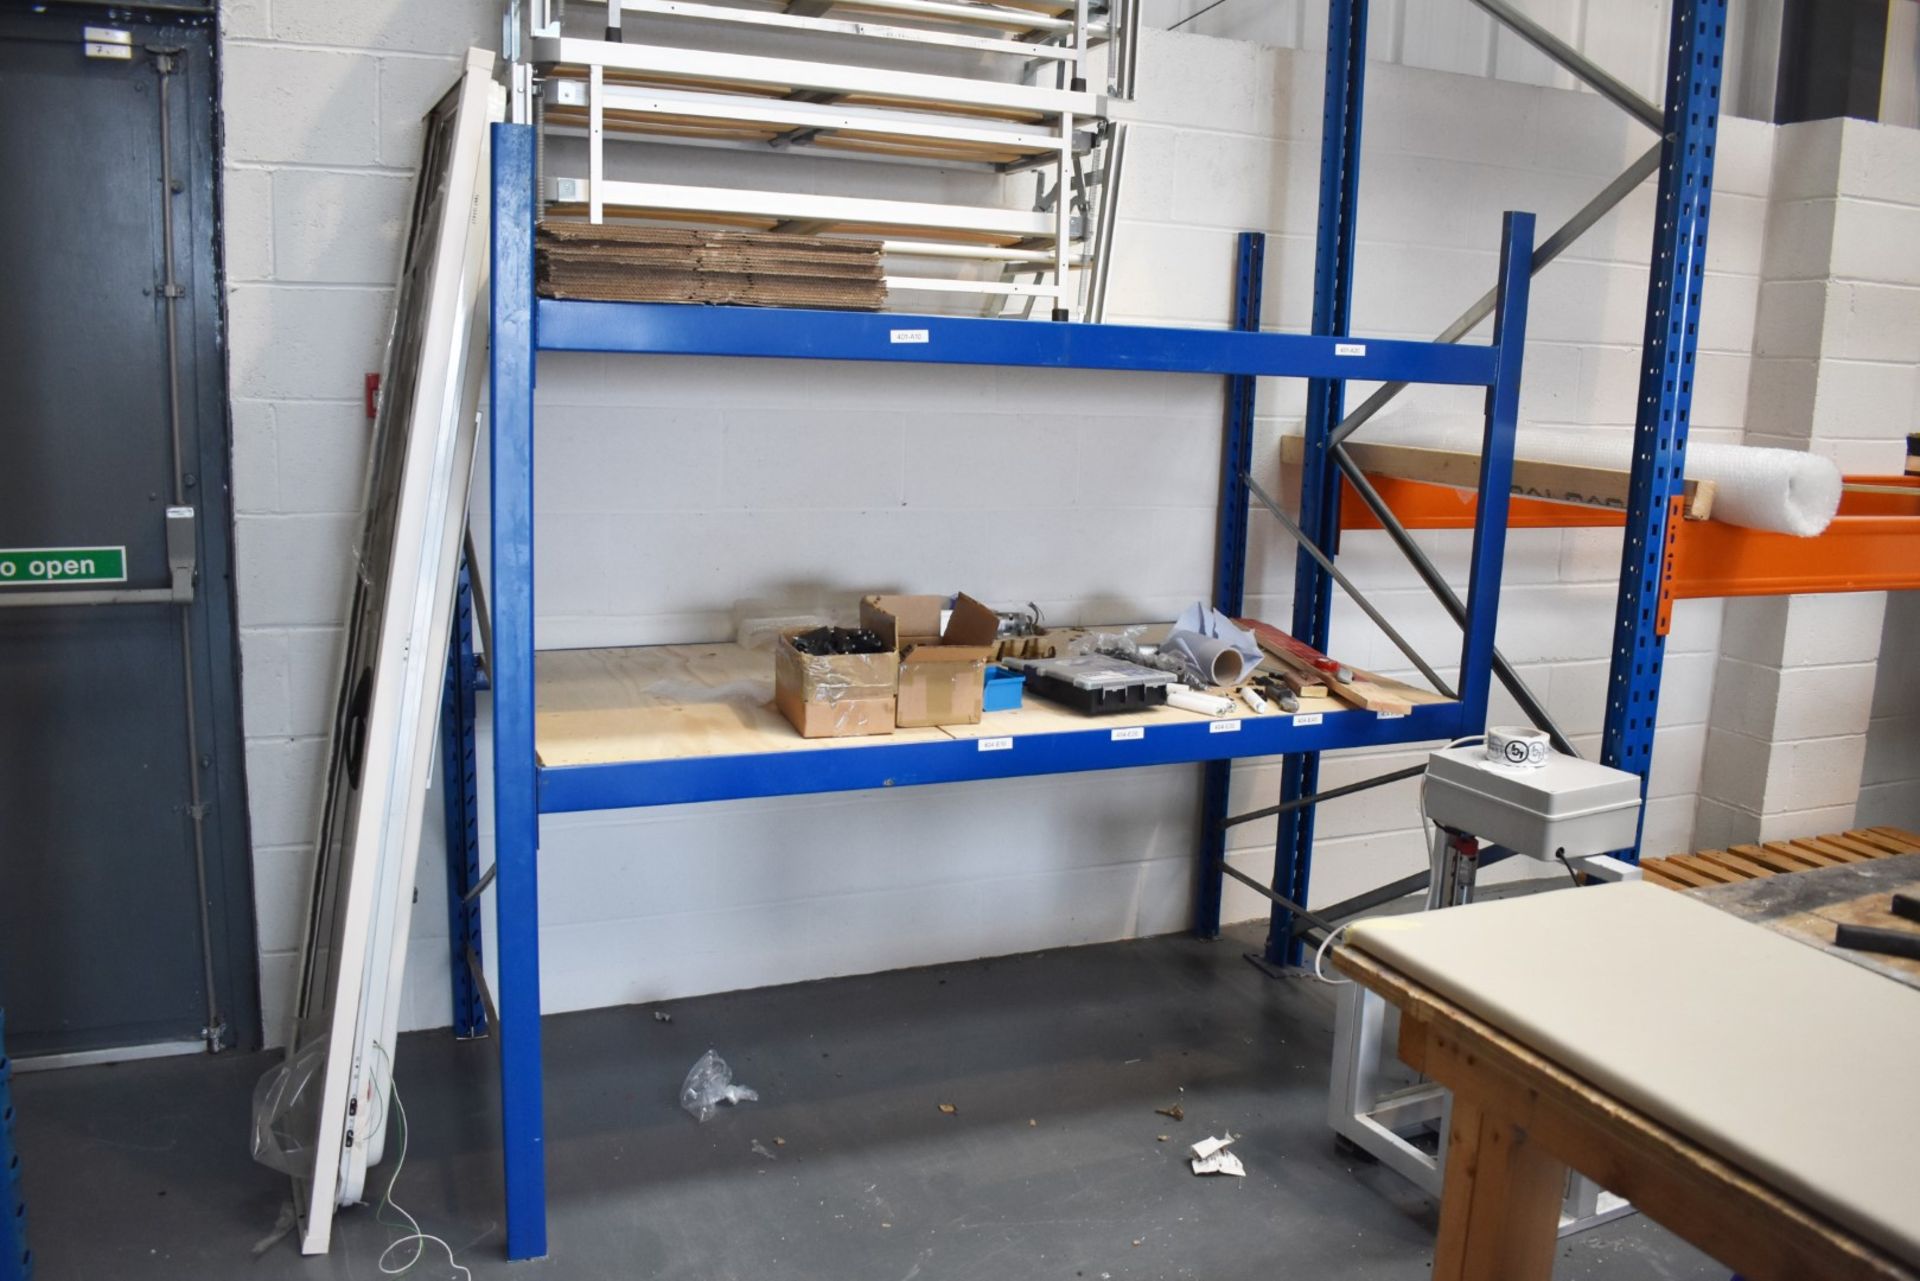 5 x Bays of Warehouse Storage Shelving - Includes 6 x Uprights, 22 x Crossbeams and Shelves - CL501 - Image 5 of 6